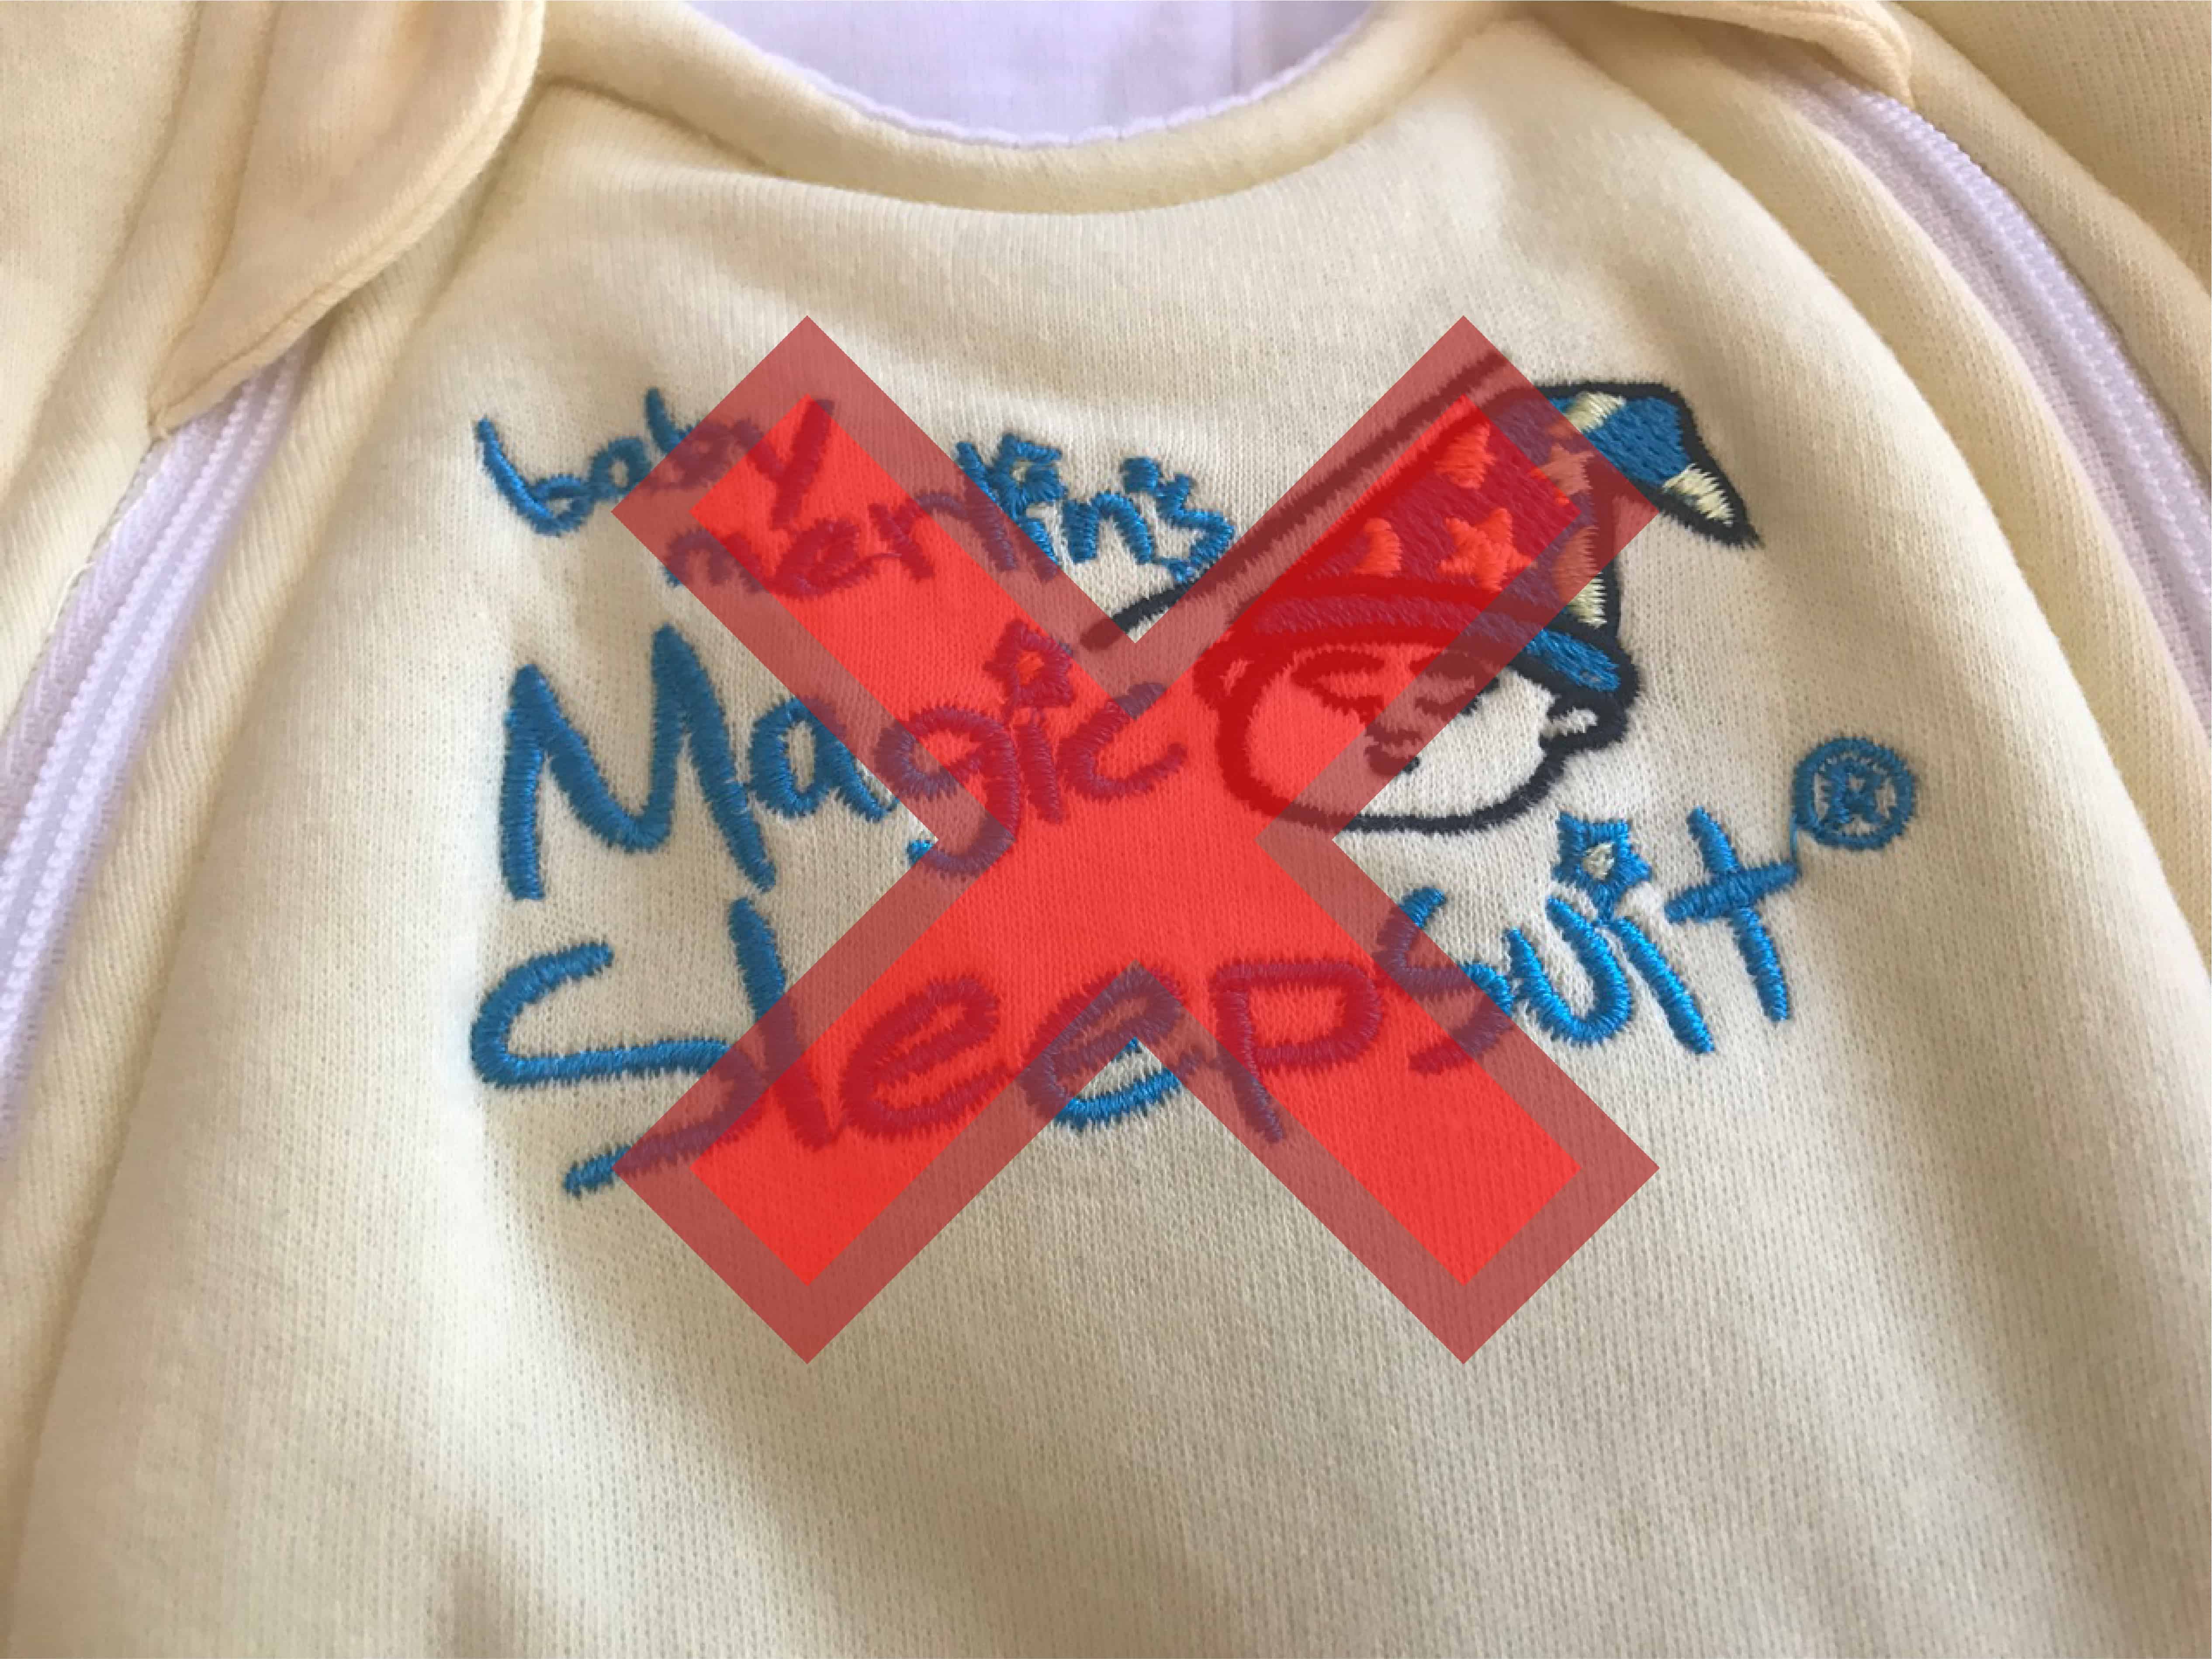 Baby Merlin S Magic Sleepsuit Review Not Recommended Baby